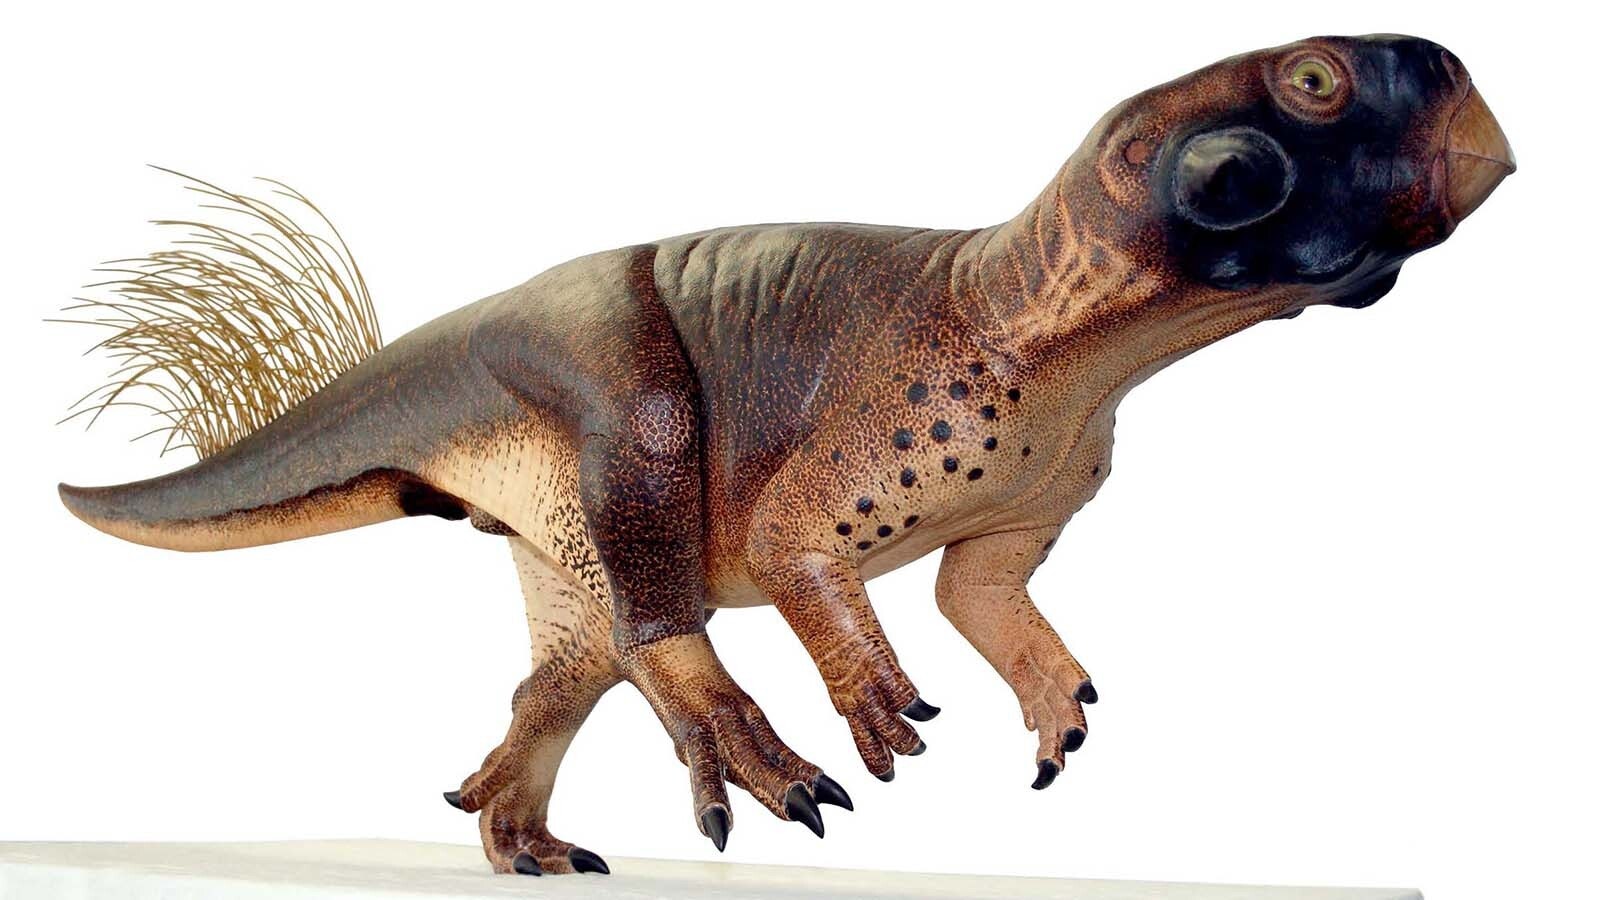 A model of an adult Psittacosaurus. The 6-foot-long, 80-million-year-old dinosaur is a relative of Triceratops, Wyoming's, state dinosaur.